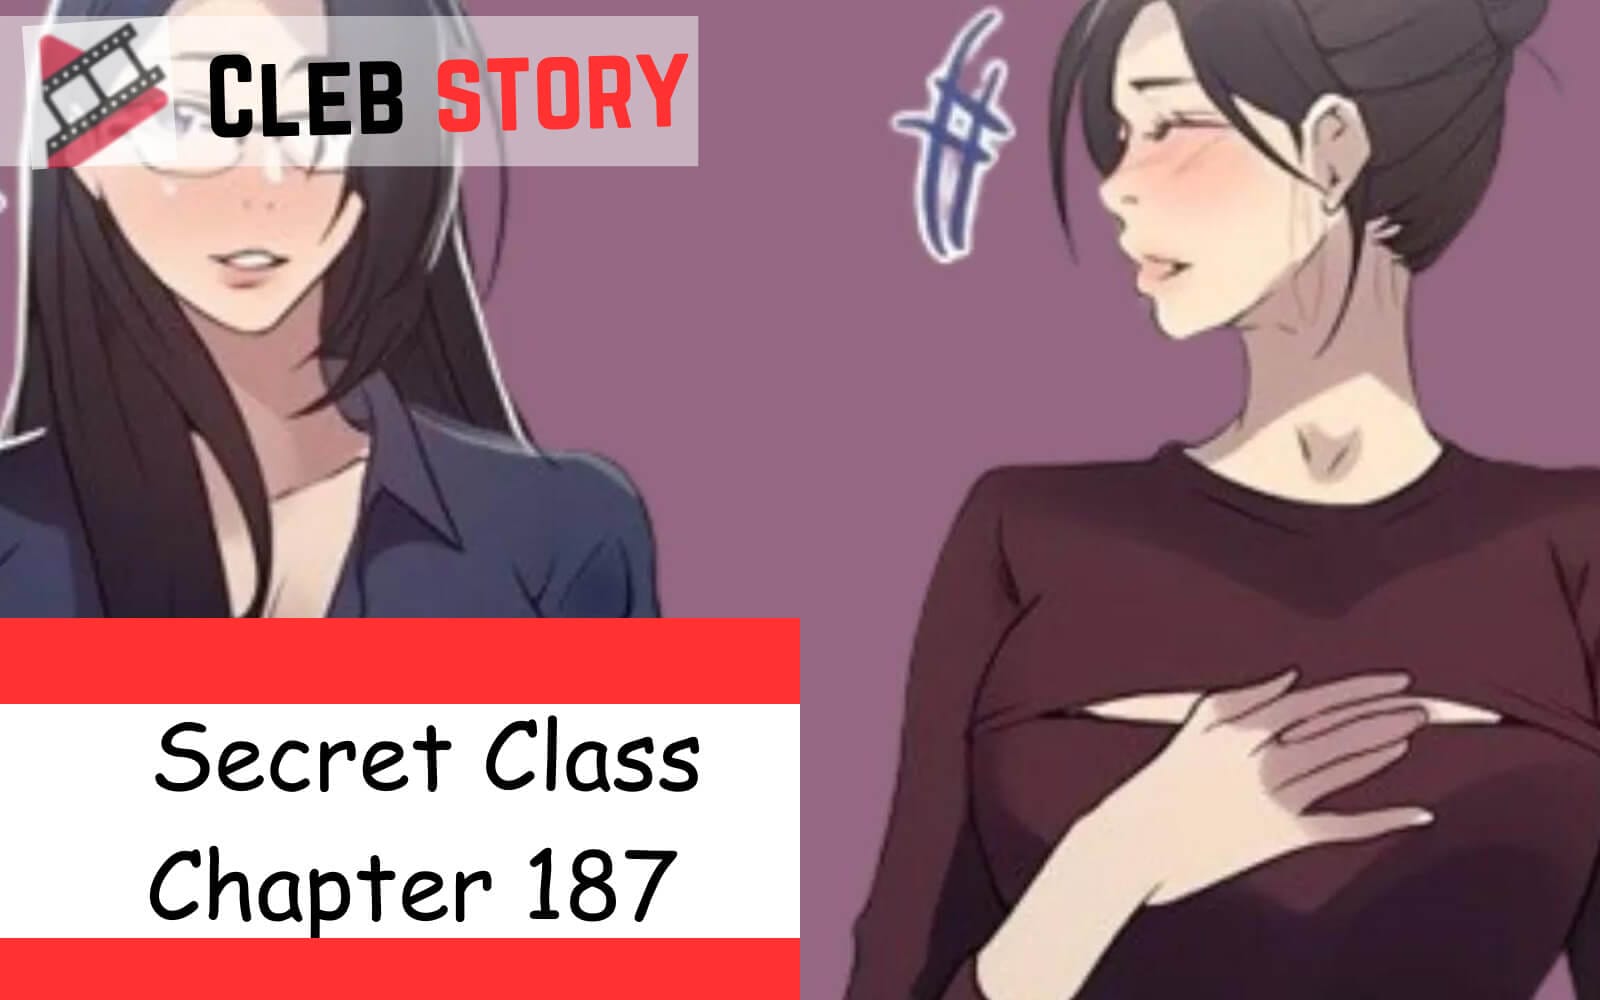 When Is Secret Class Chapter 187 Coming Out